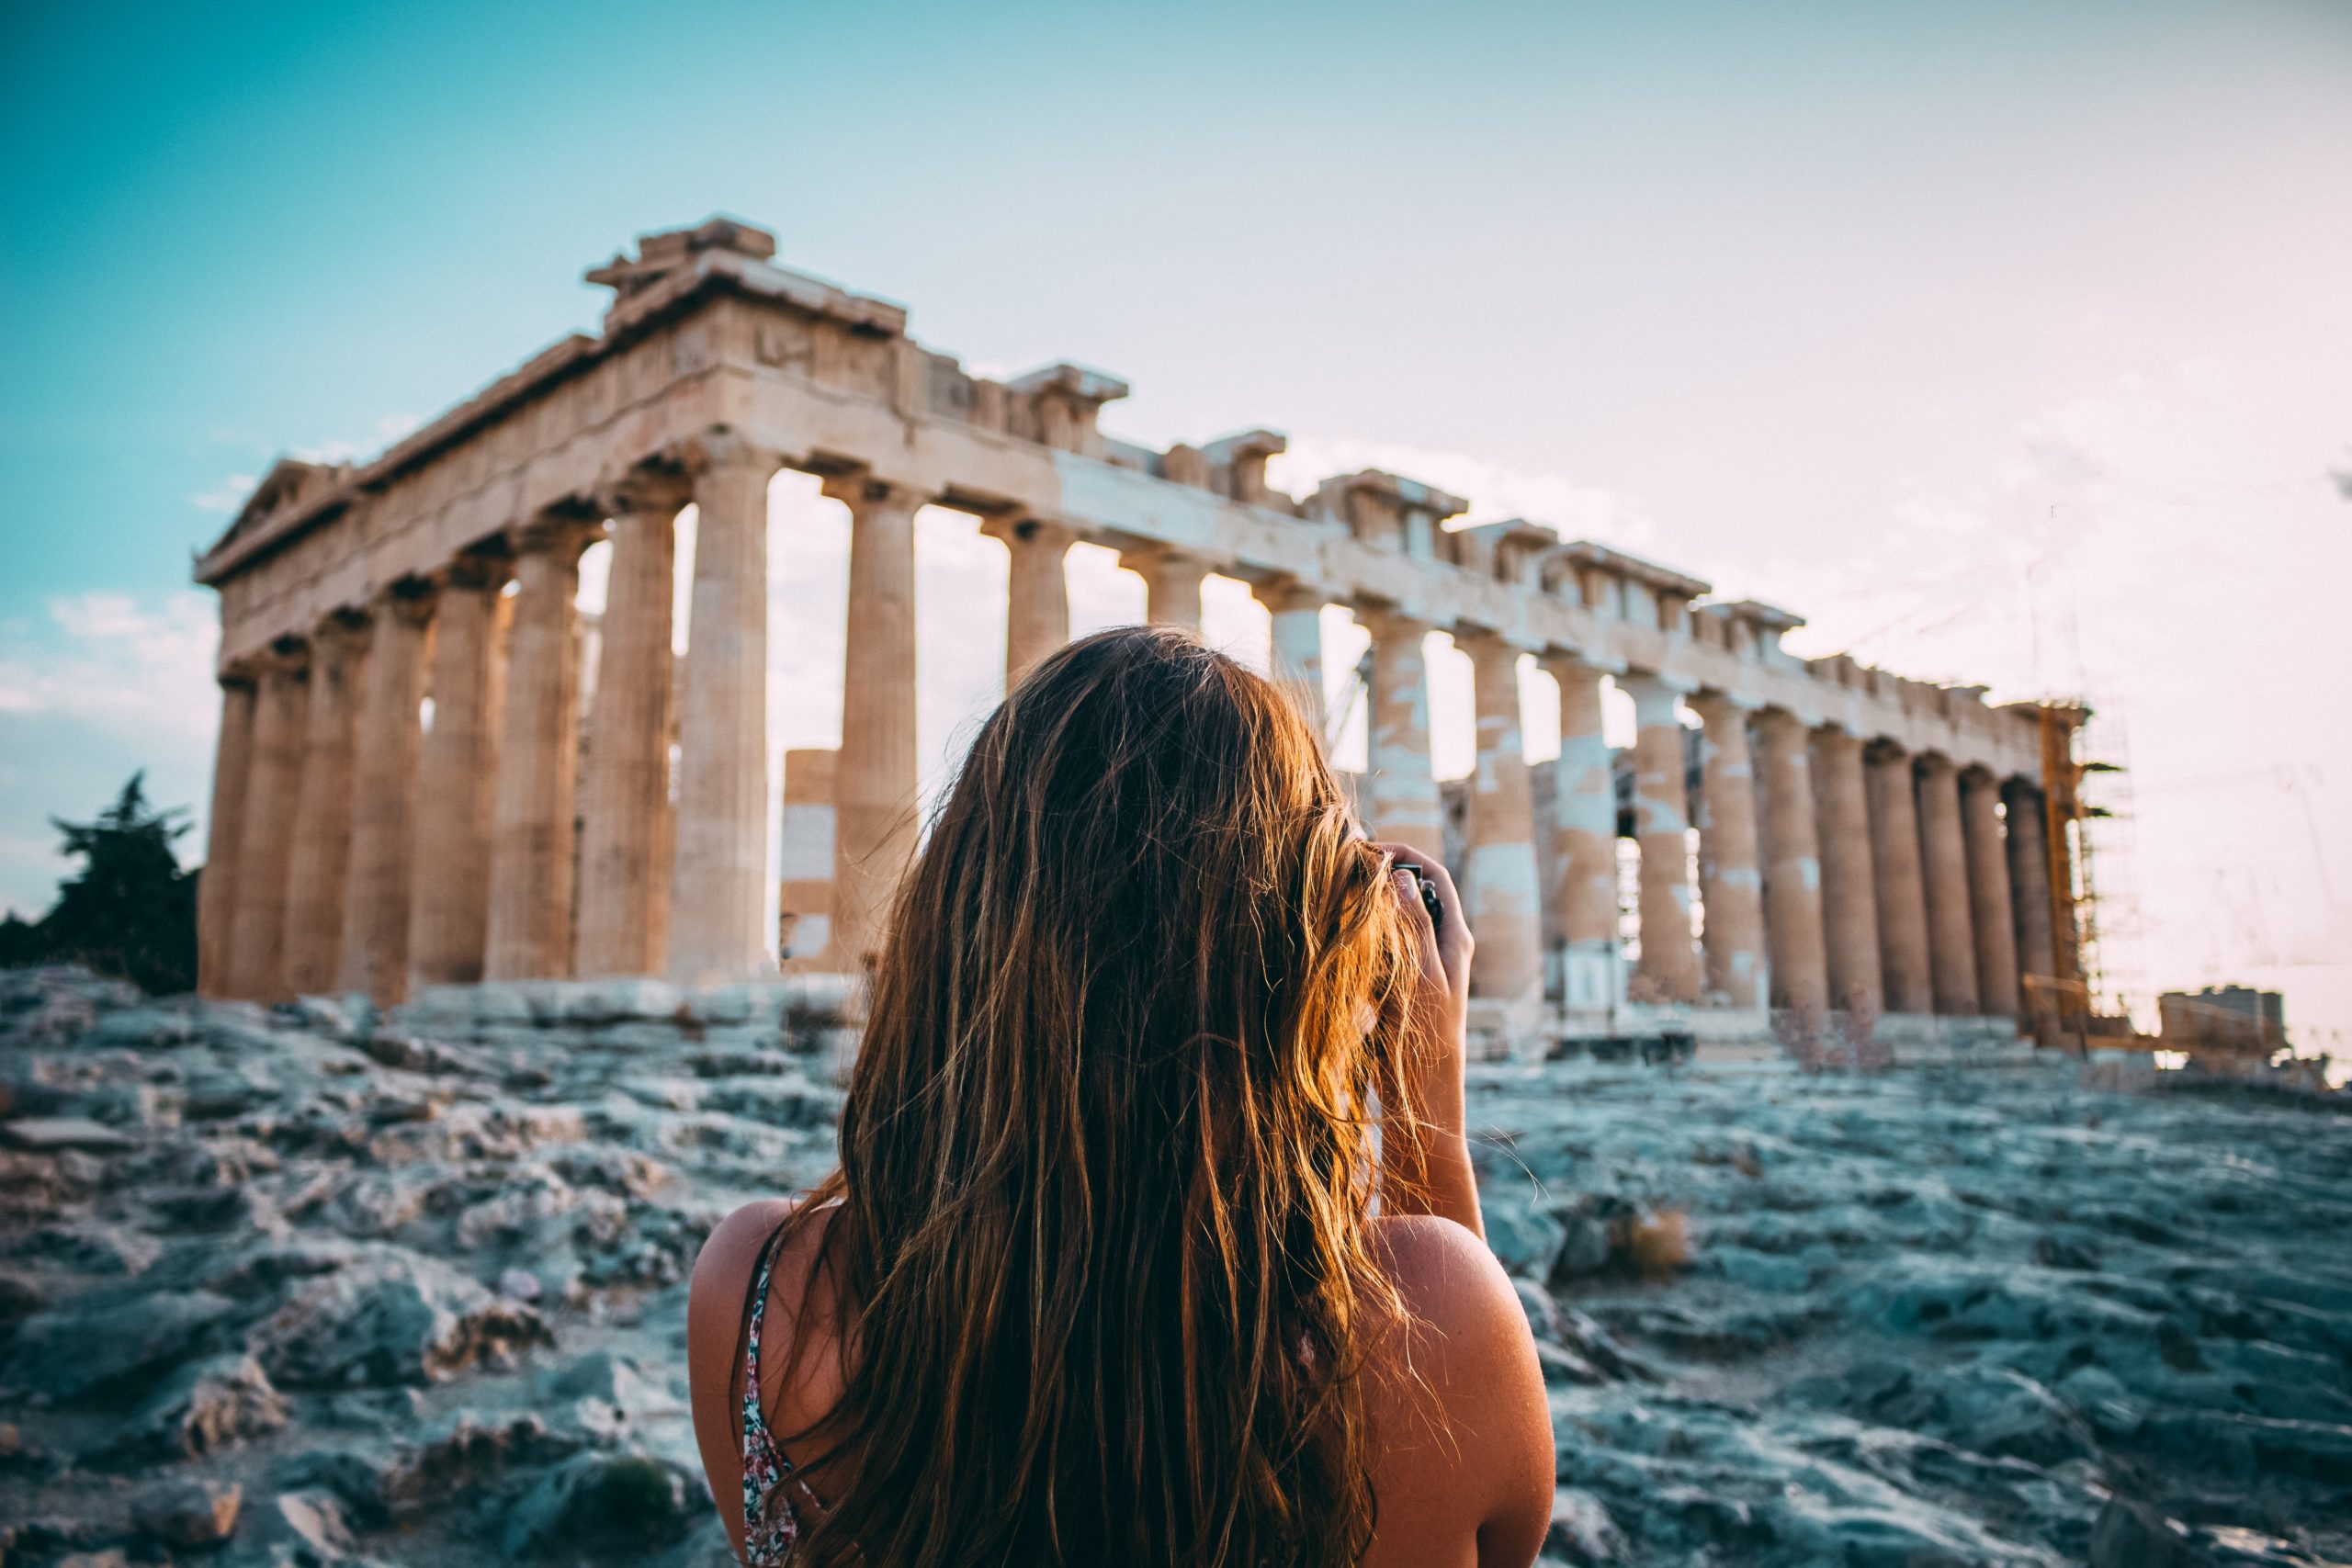 Backside of a woman with brown hair who is taking a picture of the temple of Parthenon